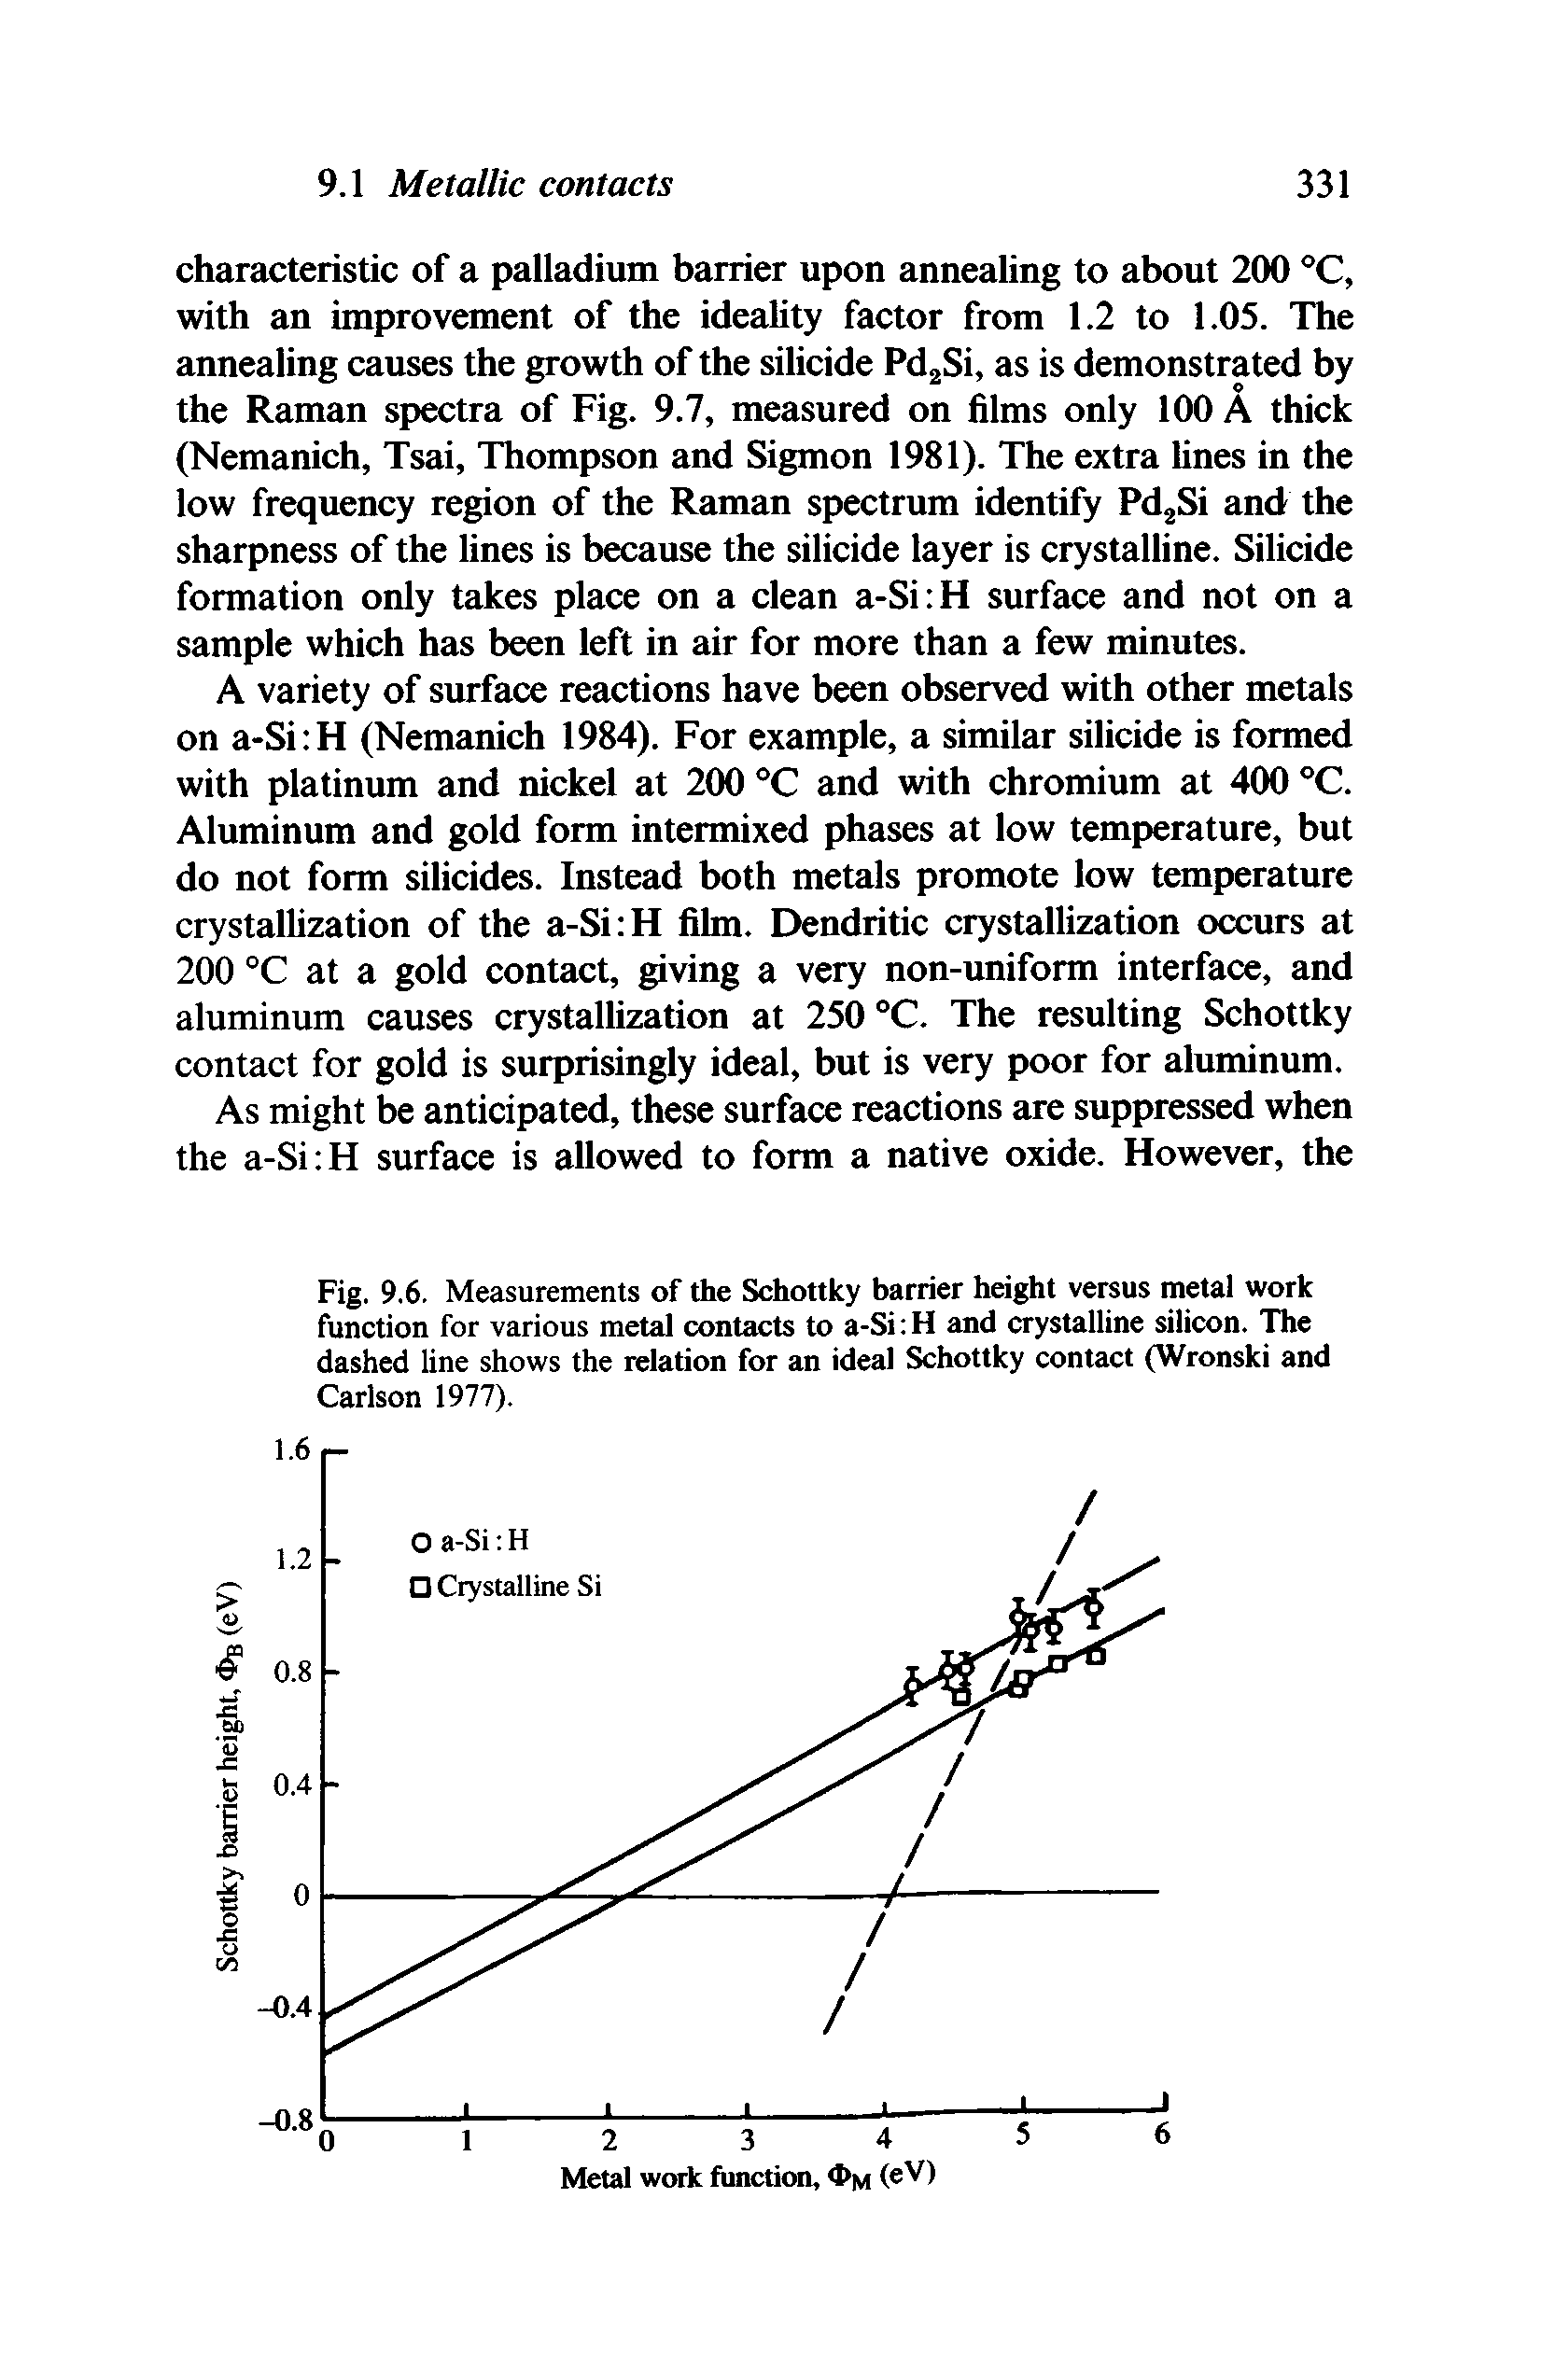 Fig. 9.6. Measurements of the Schottky barrier height versus metal work function for various metal contacts to a-Si H and crystalline silicon. The dashed line shows the relation for an ideal Schottky contact (Wronski and Carlson 1977).